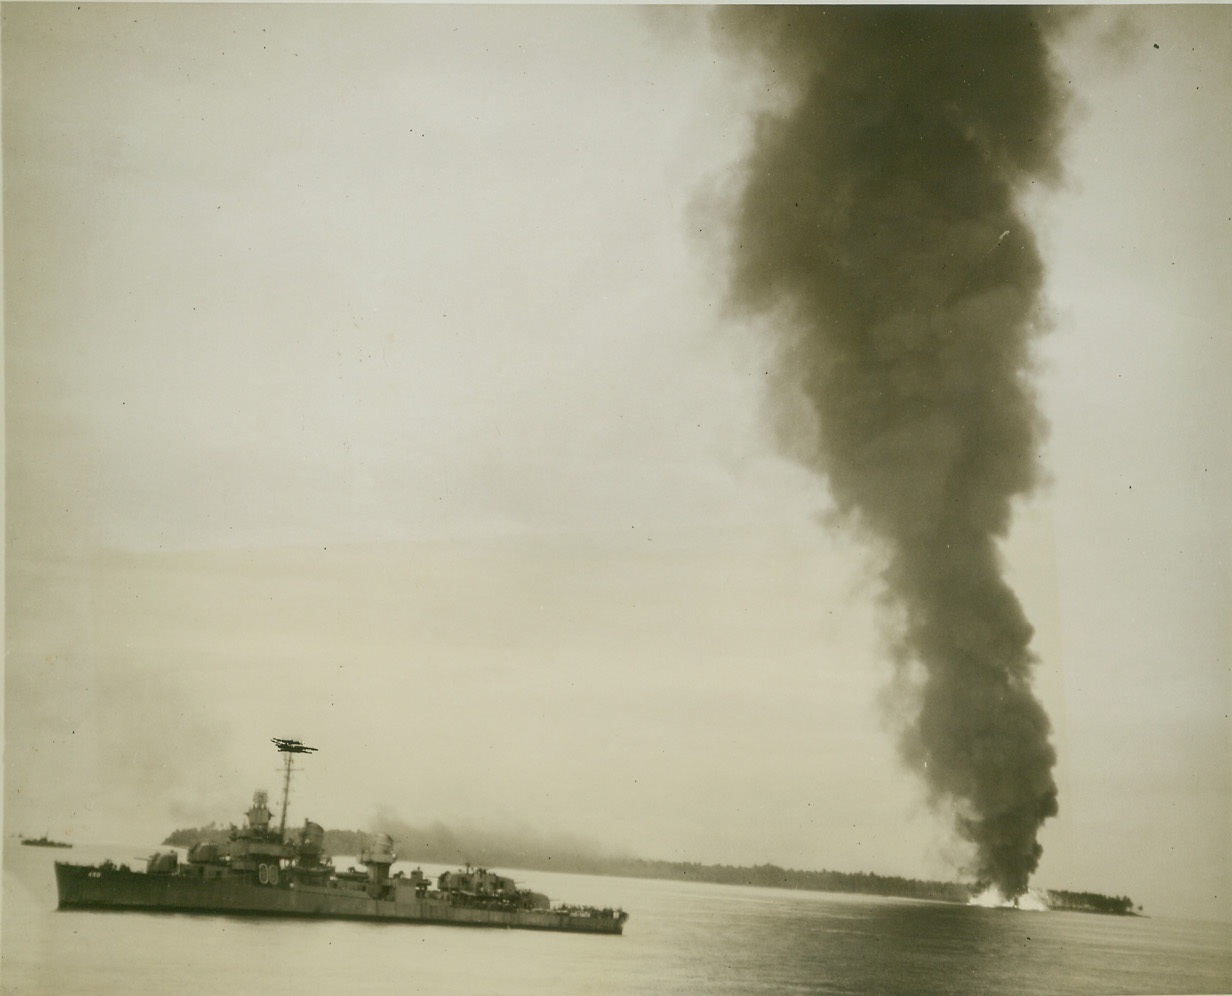 YANK DESTROYERS BLAST FUEL DUMP, 5/3/1944. DUTCH NEW GUINEA – A column of thick, black smoke towers from a blazing Jap fuel dump on Seleo Island, after a direct hit by U.S. destroyers, one of which is standing off the island at left. The island, one of three in Aitape Harbor, was attacked during the invasions of Dutch New Guinea. (Passed by censors.) Credit: ACME photo by Thomas L. Shafer for the War Picture Pool;